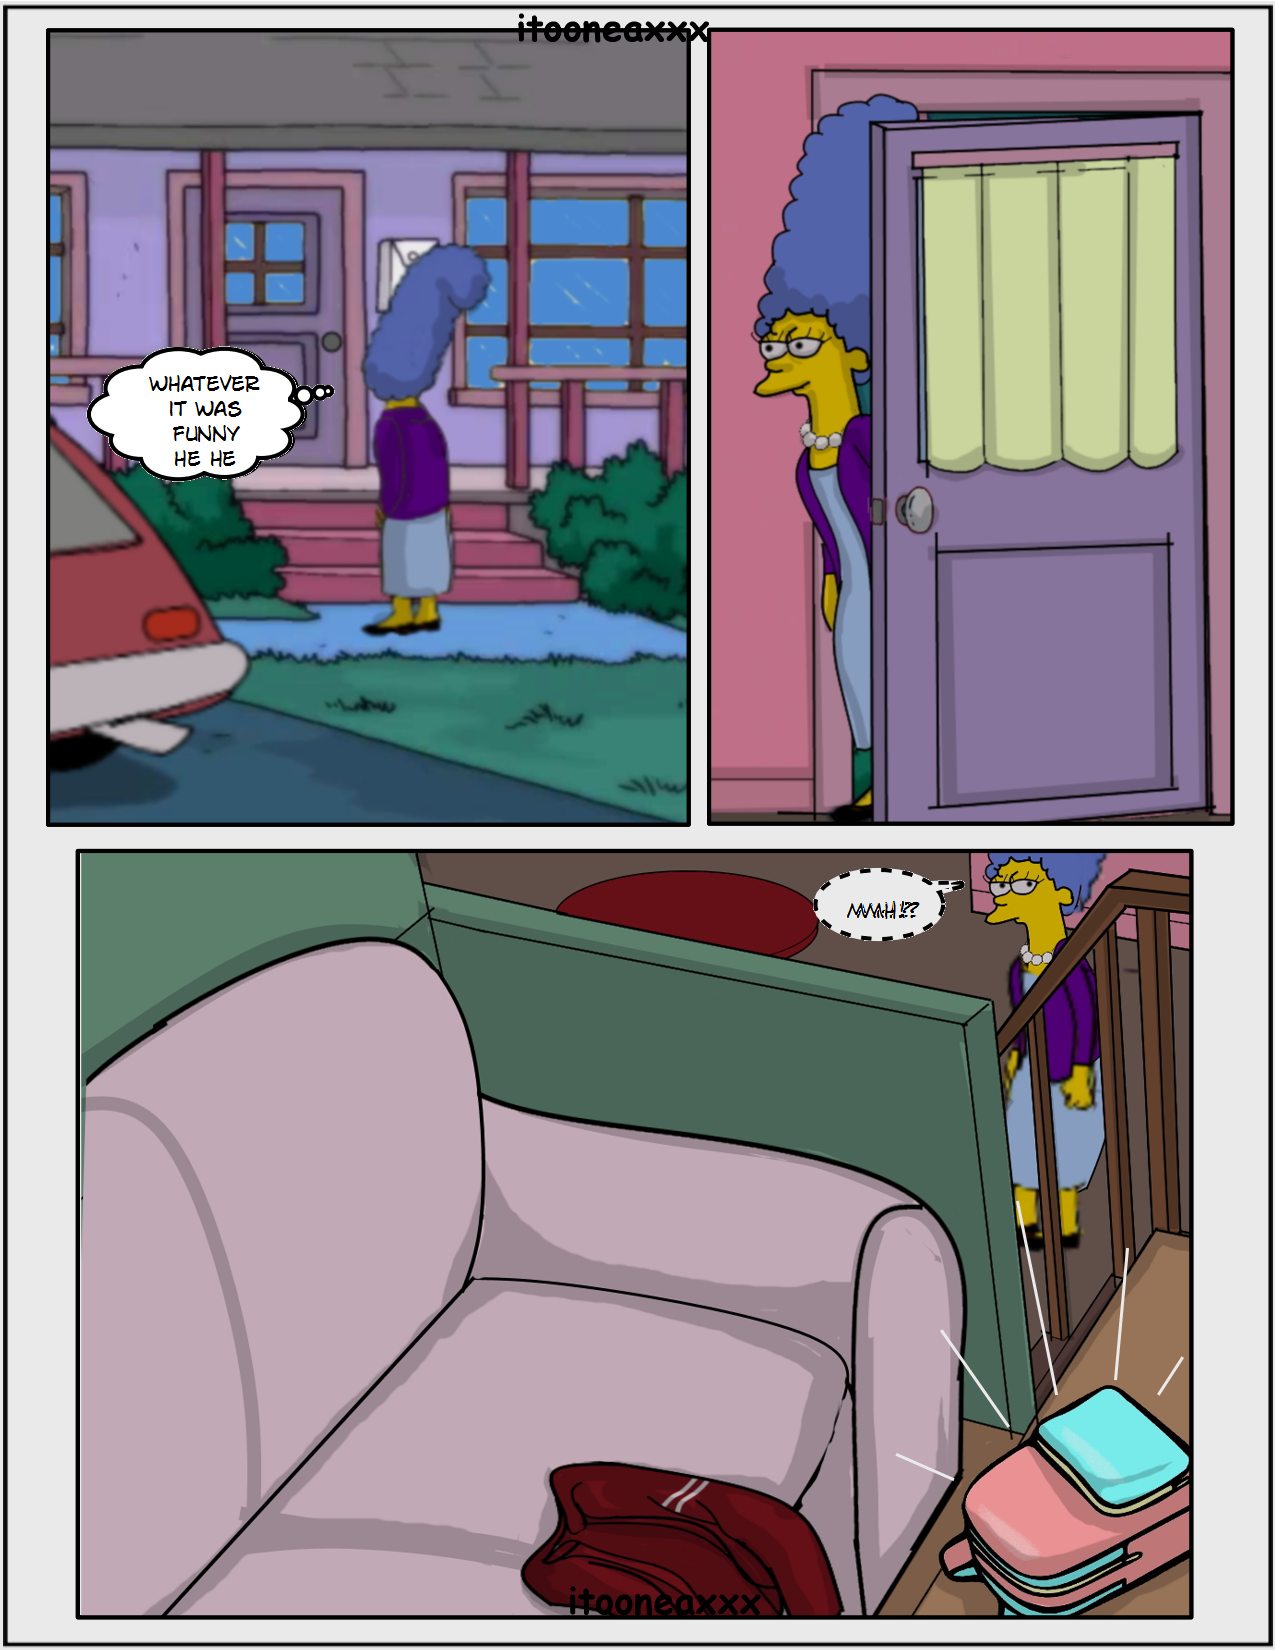 The Simpsons – Affinity 4 by Itooneaxxx 